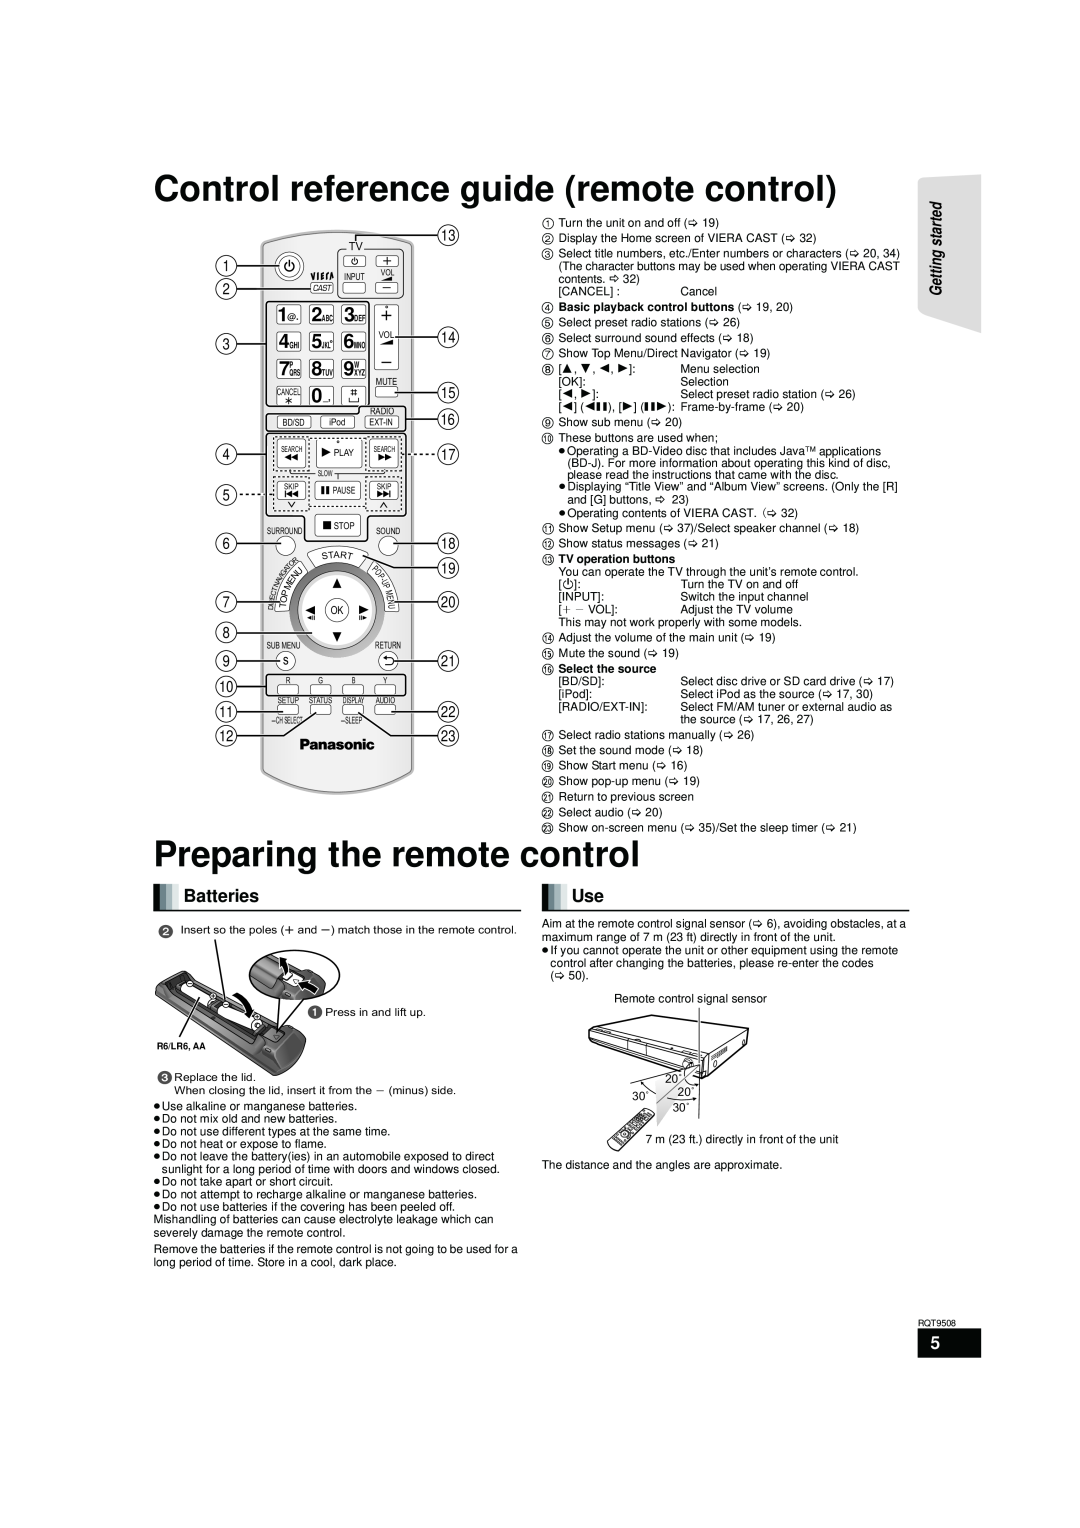 Panasonic SC-BT203 Control reference guide remote control, Preparing the remote control, Batteries, 8 9W, Getting started 